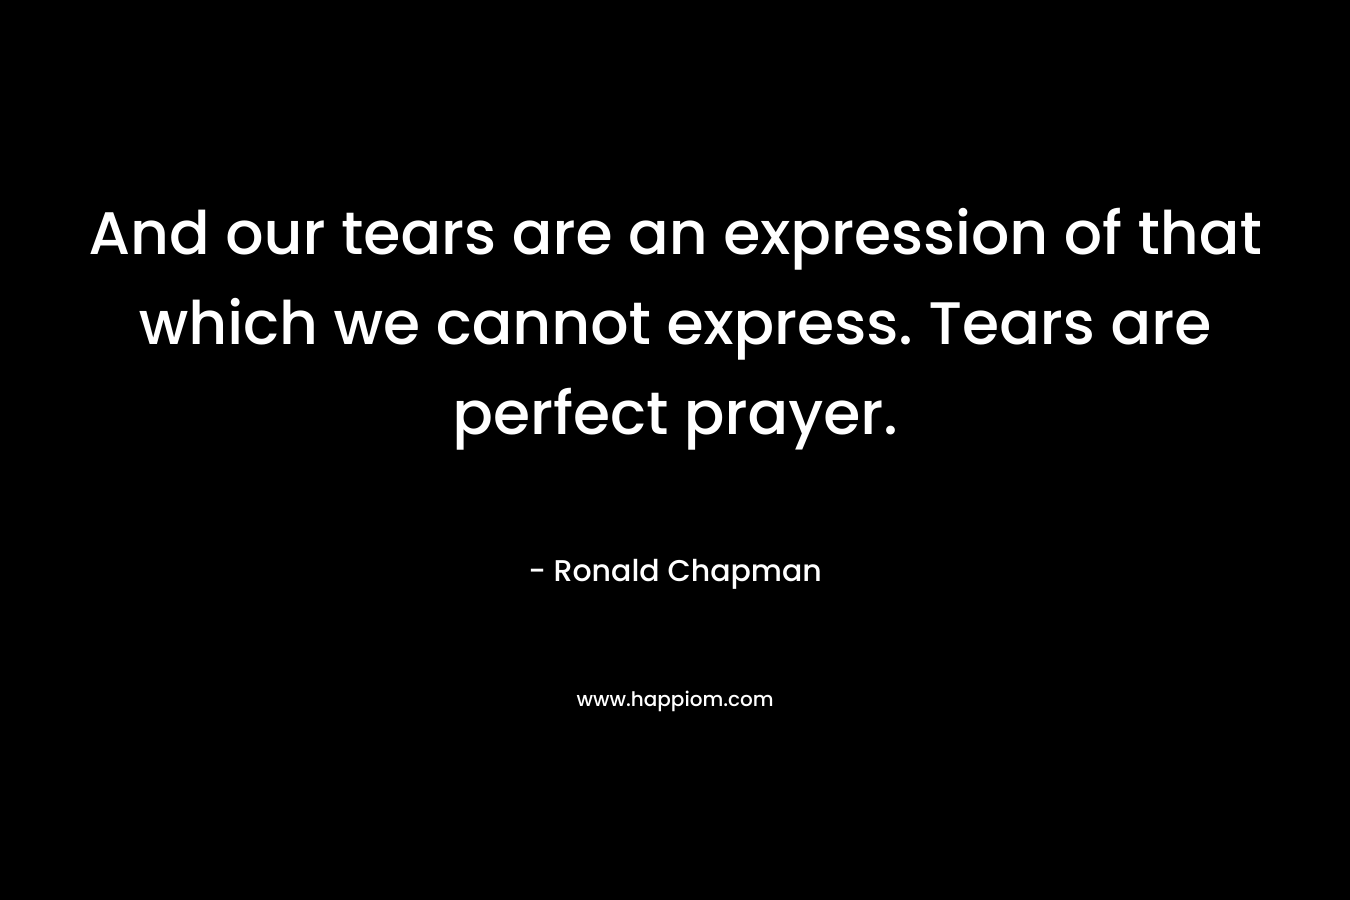 And our tears are an expression of that which we cannot express. Tears are perfect prayer.